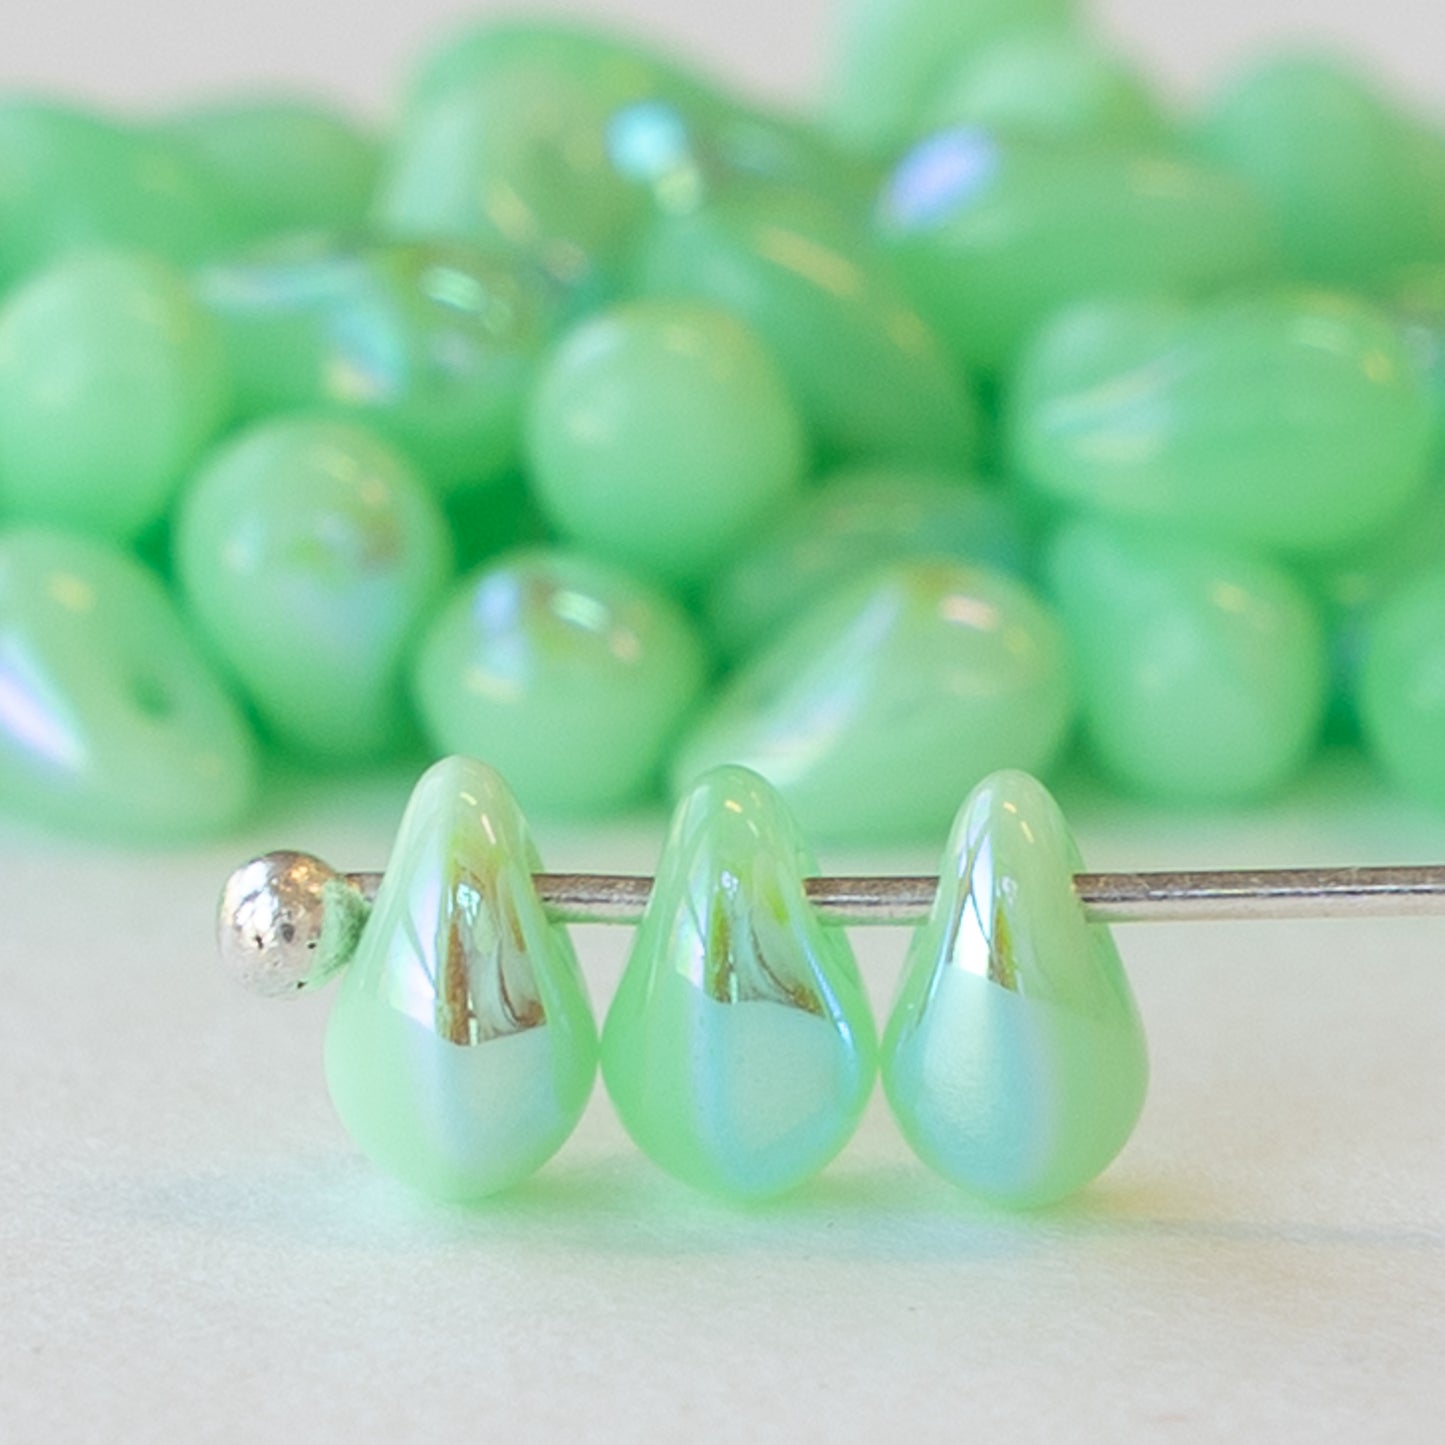 Load image into Gallery viewer, 4x6mm Glass Teardrops - Jade Green AB - 100 Beads
